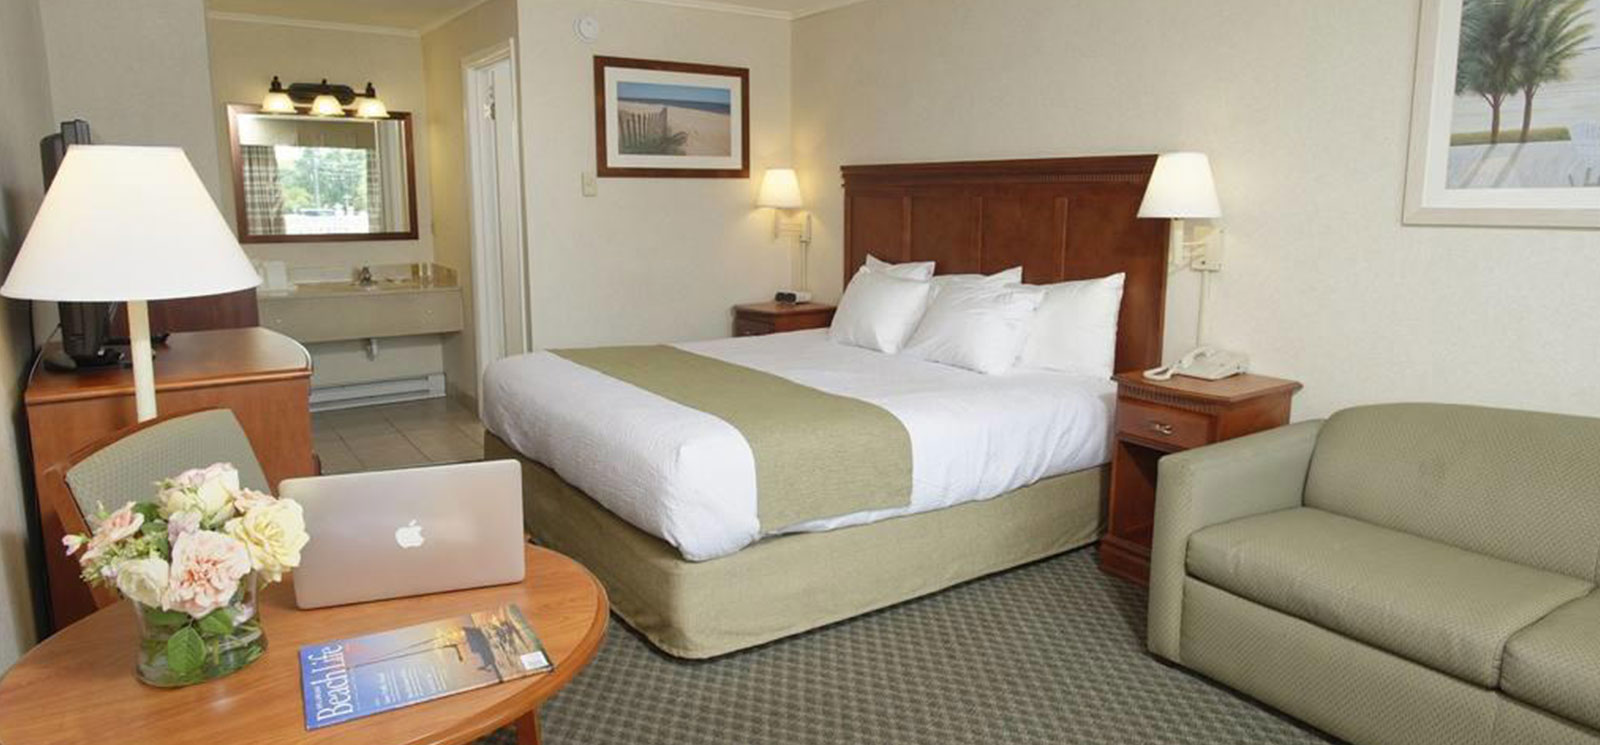 Stay 5 Nights and Save Special from The Oceanus Rehoboth Beach, Delaware